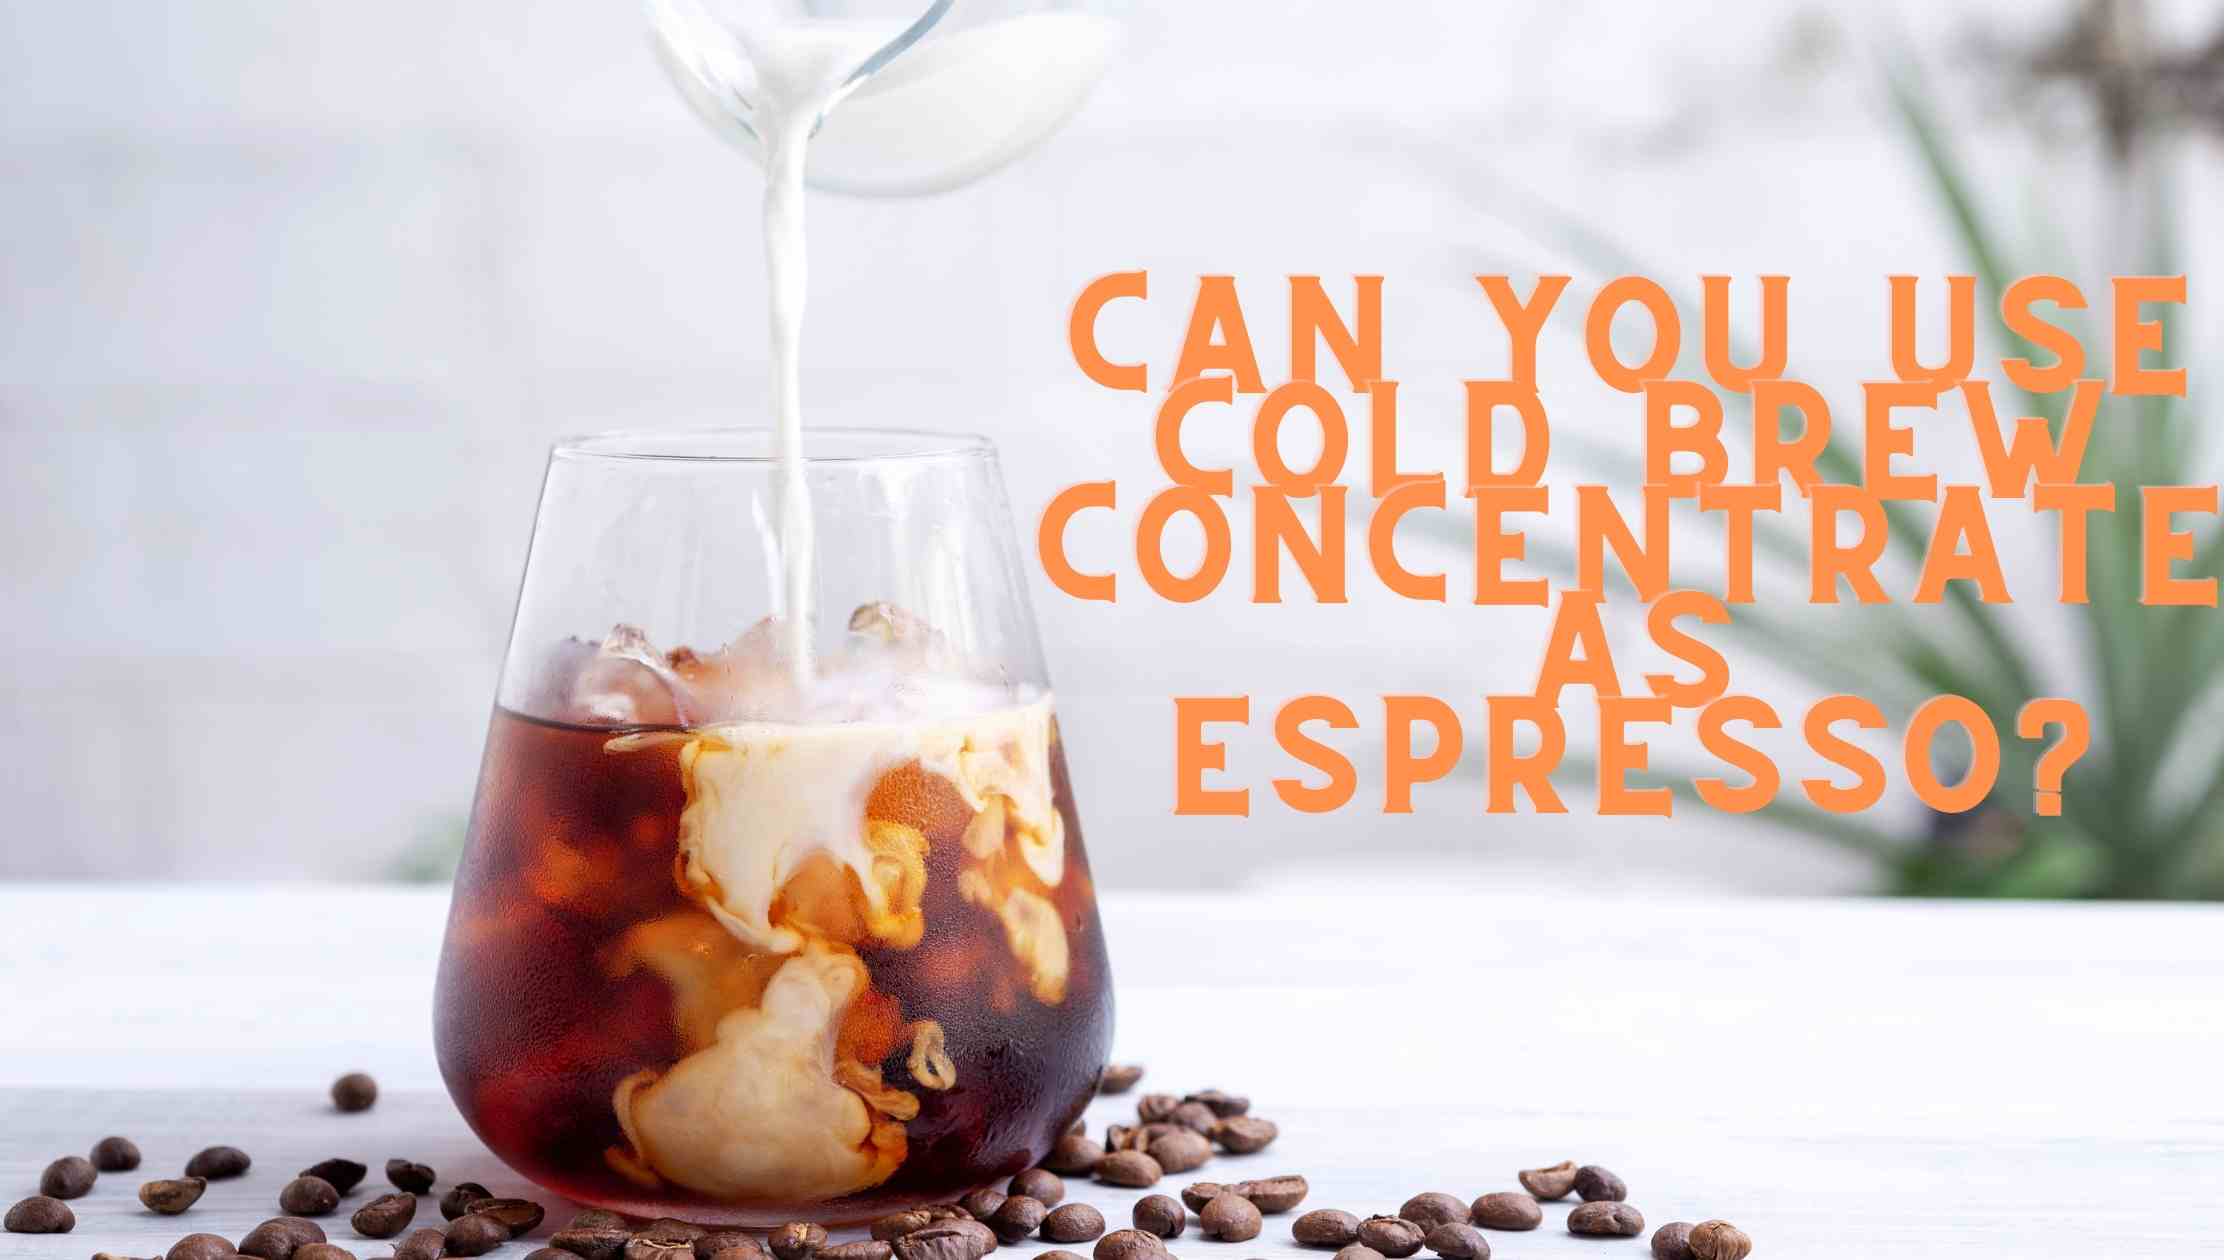 Can you use cold brew concentrate as espresso?